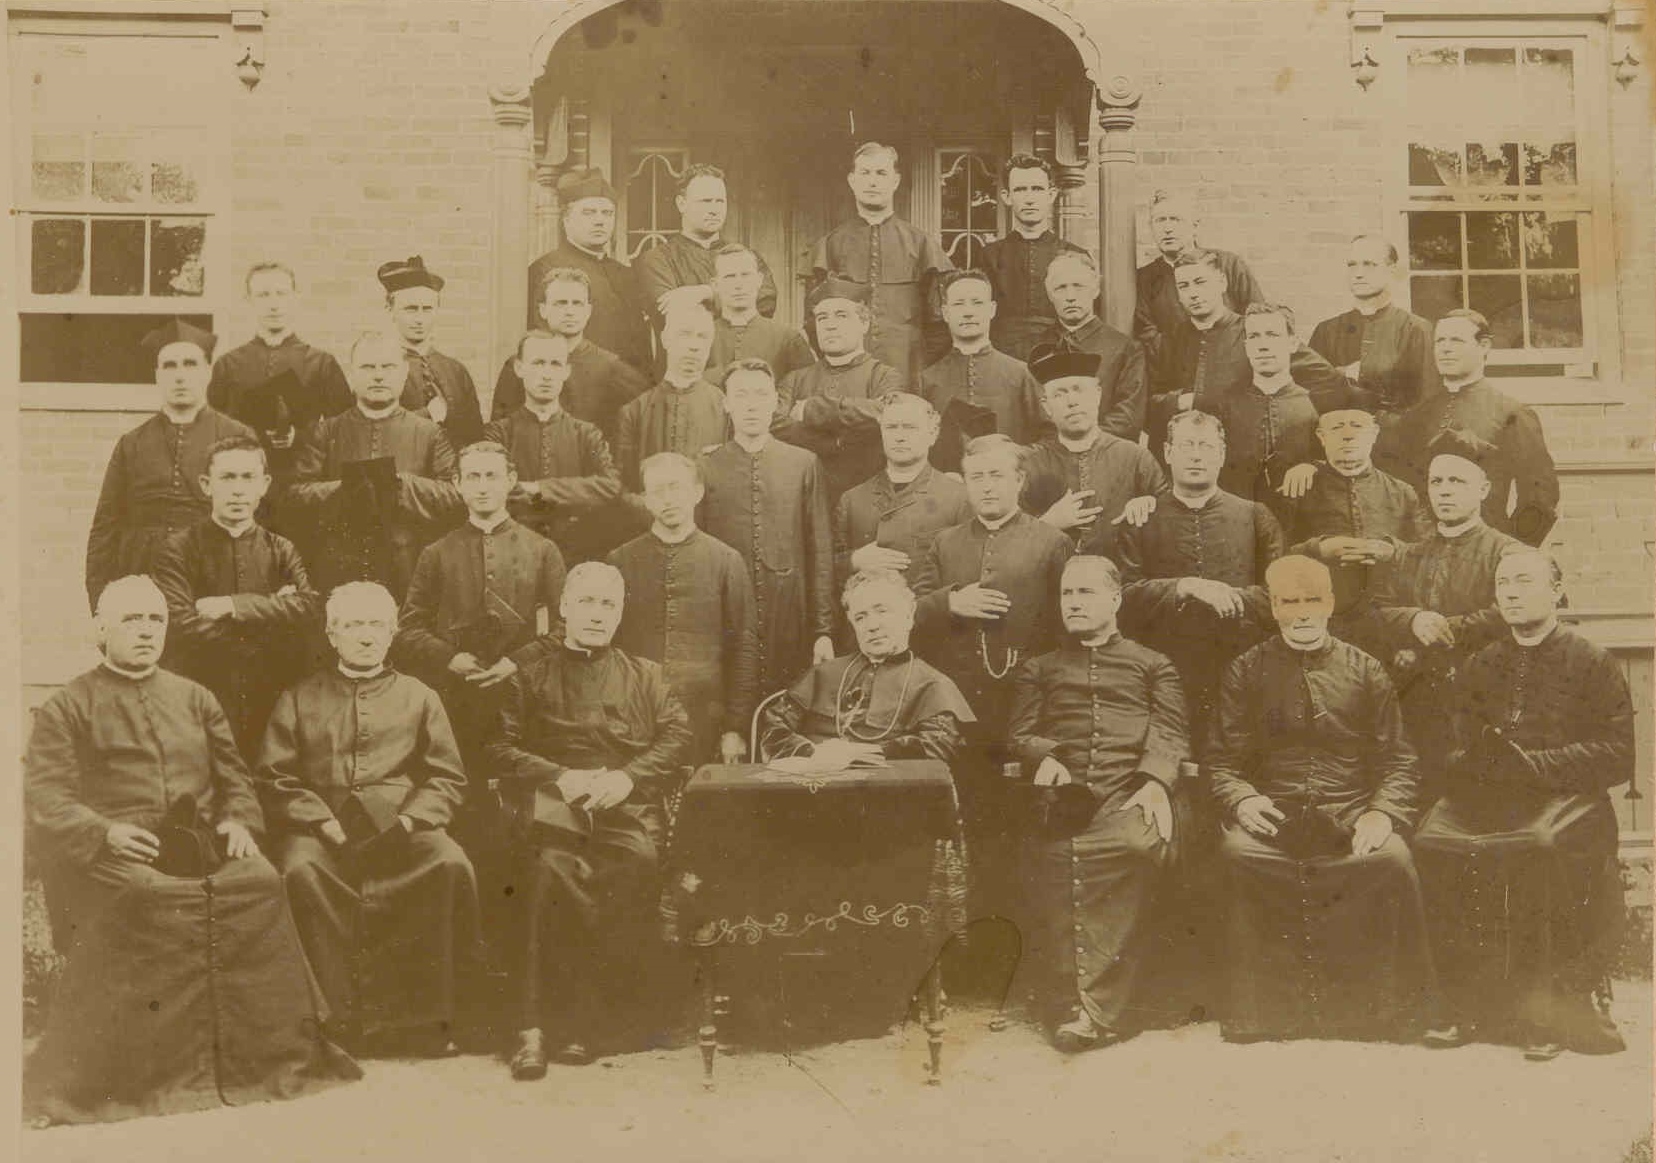 Sepia photograph depicting a group portrait of the clergy of the Diocese of Hamilton from 1894. There are five rows of clergy wearing cassocks and looking out at the viewer. The men in the front row are seated. Bishop Thomas Dowling is seated in the middle behind a small table.